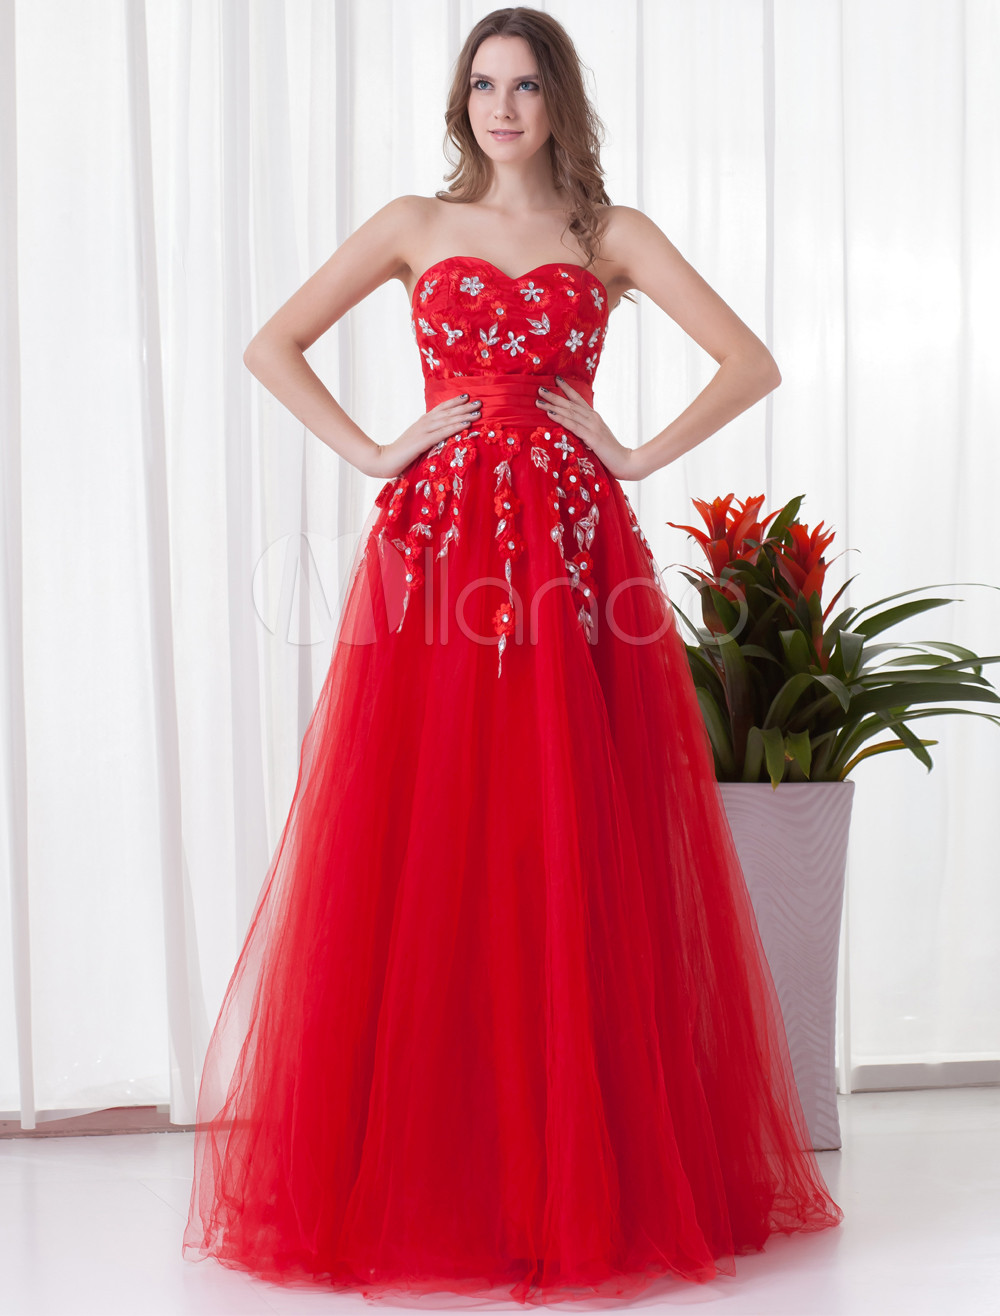 Princess Silhouette Red Net Embroidered Sweetheart Women's Prom Dress (Wedding Prom Dresses) photo